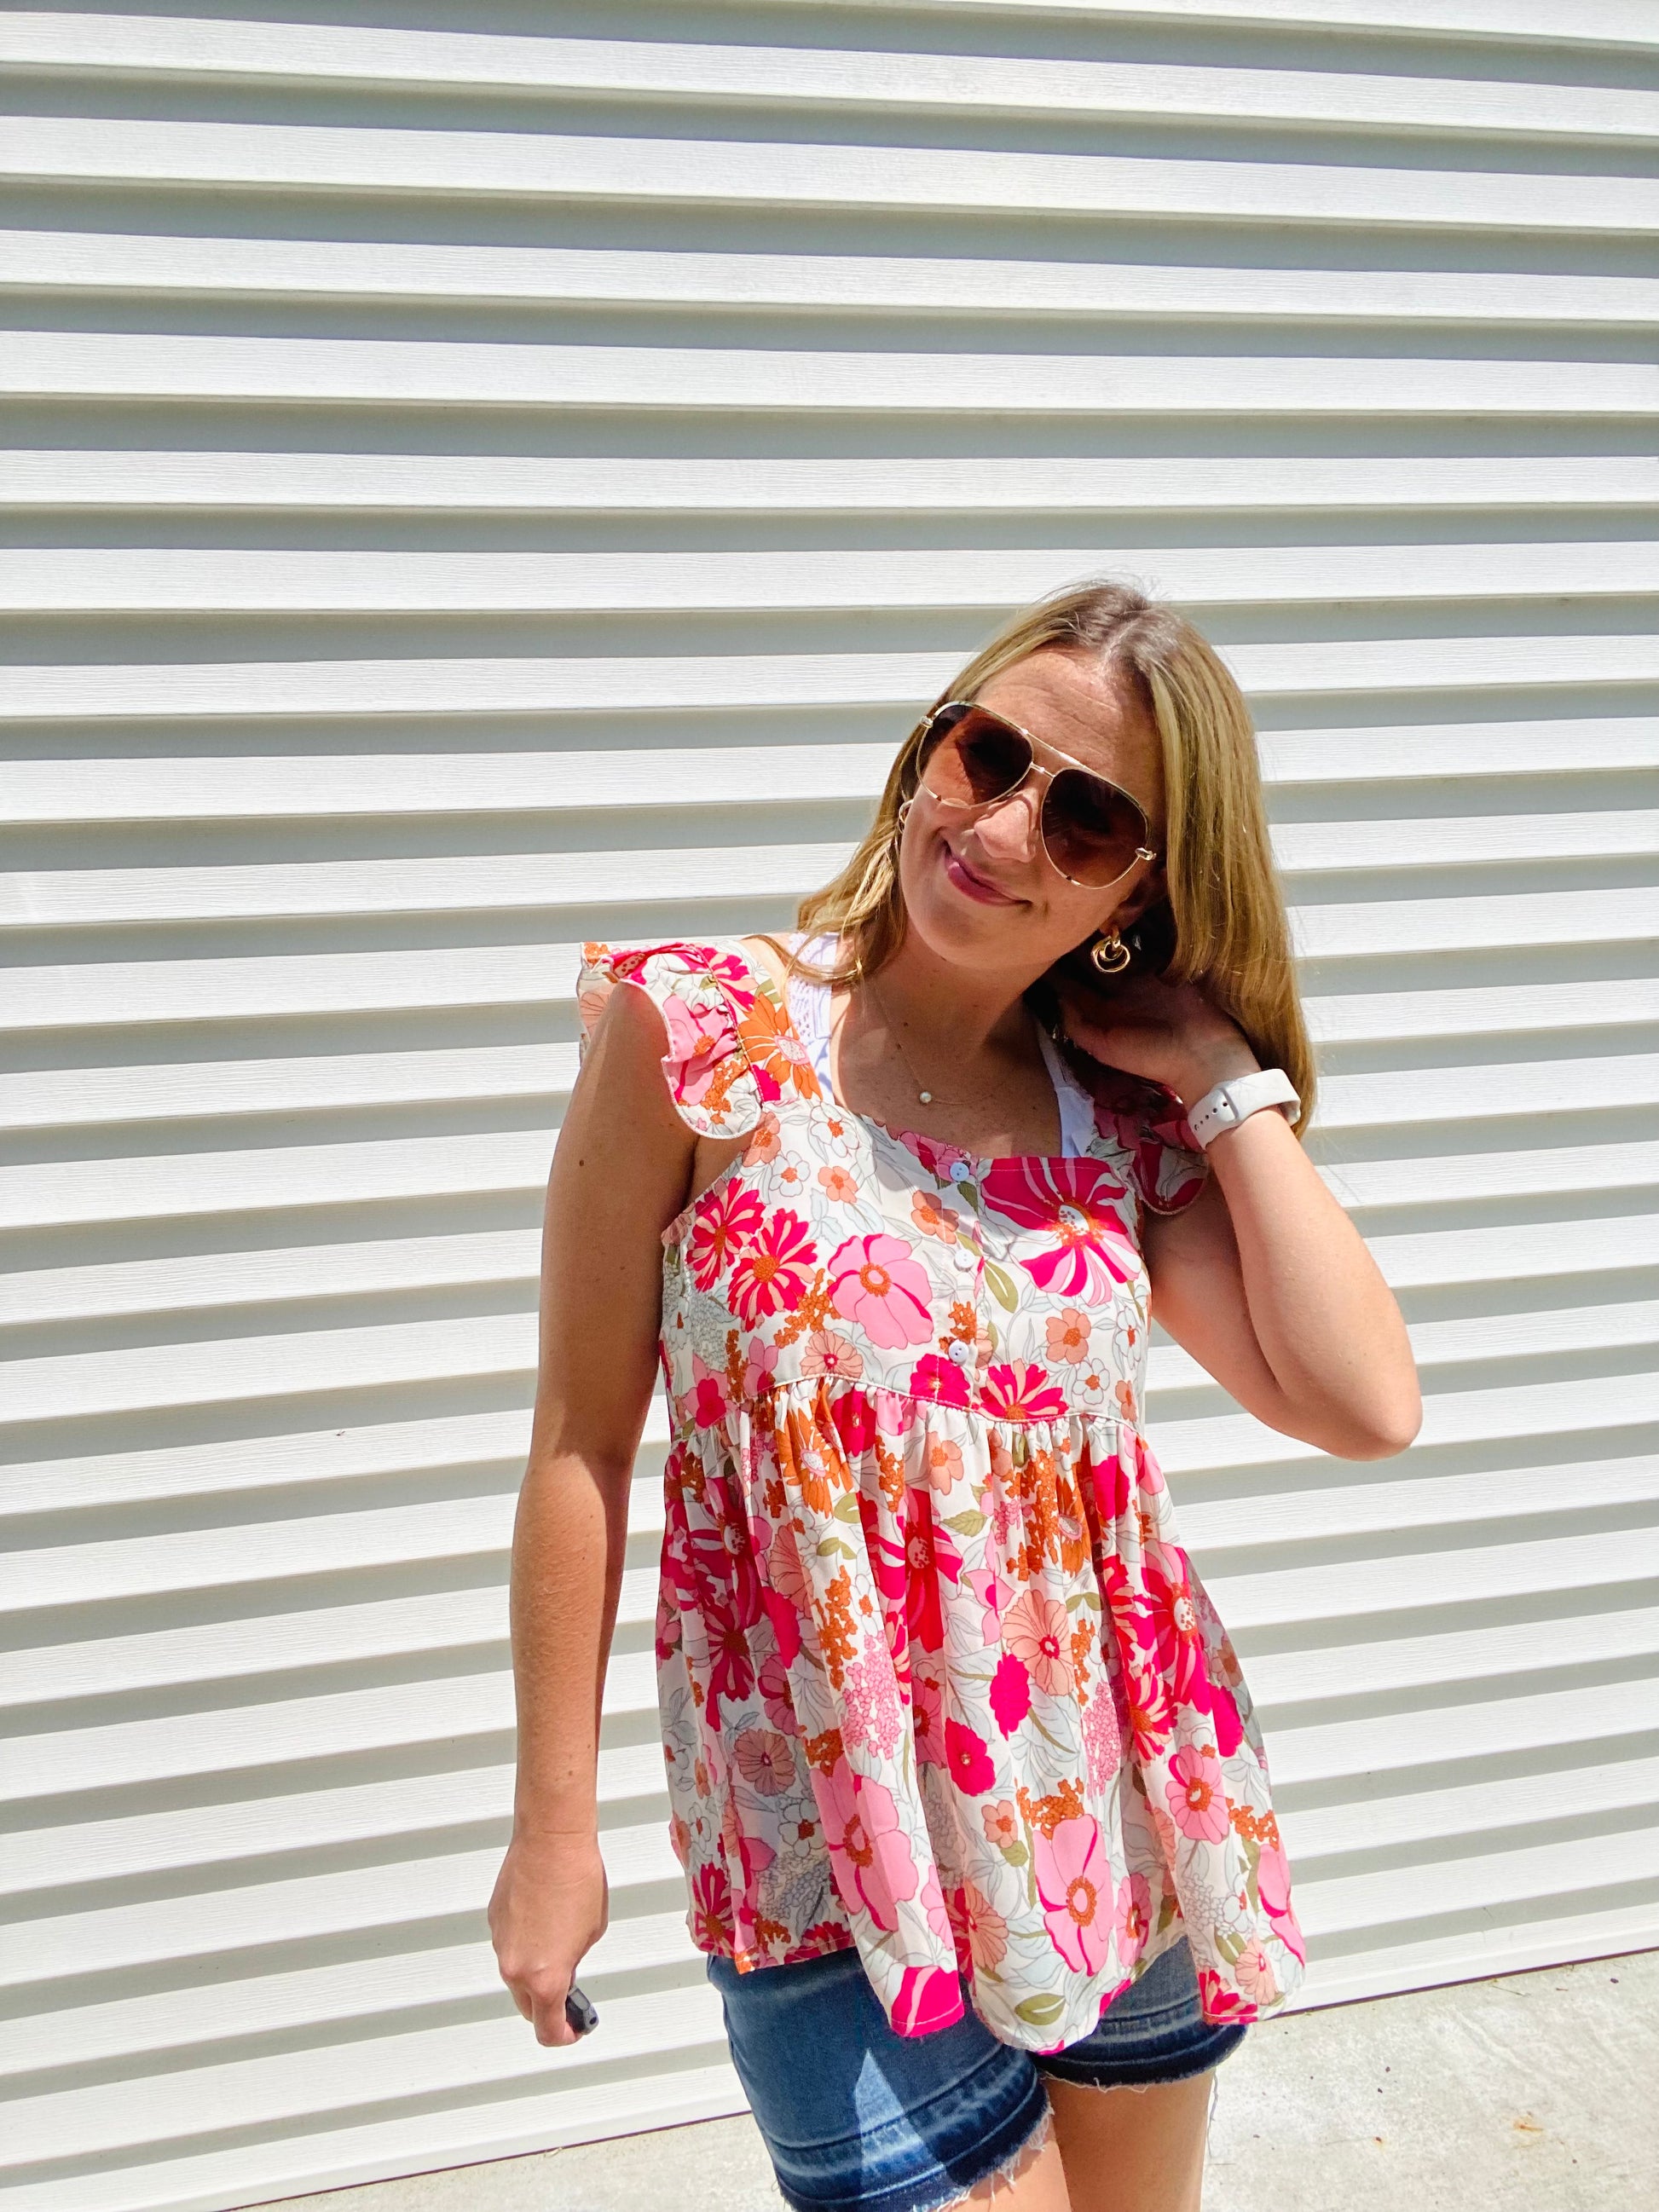 This Shades of Pink Floral Top is the perfect addition to your summer wardrobe. Its high neckline and flutter sleeve are perfect for sunny days, while the bright colors and peplum top add an extra touch of style. Accessorize to create a look that is all your own.